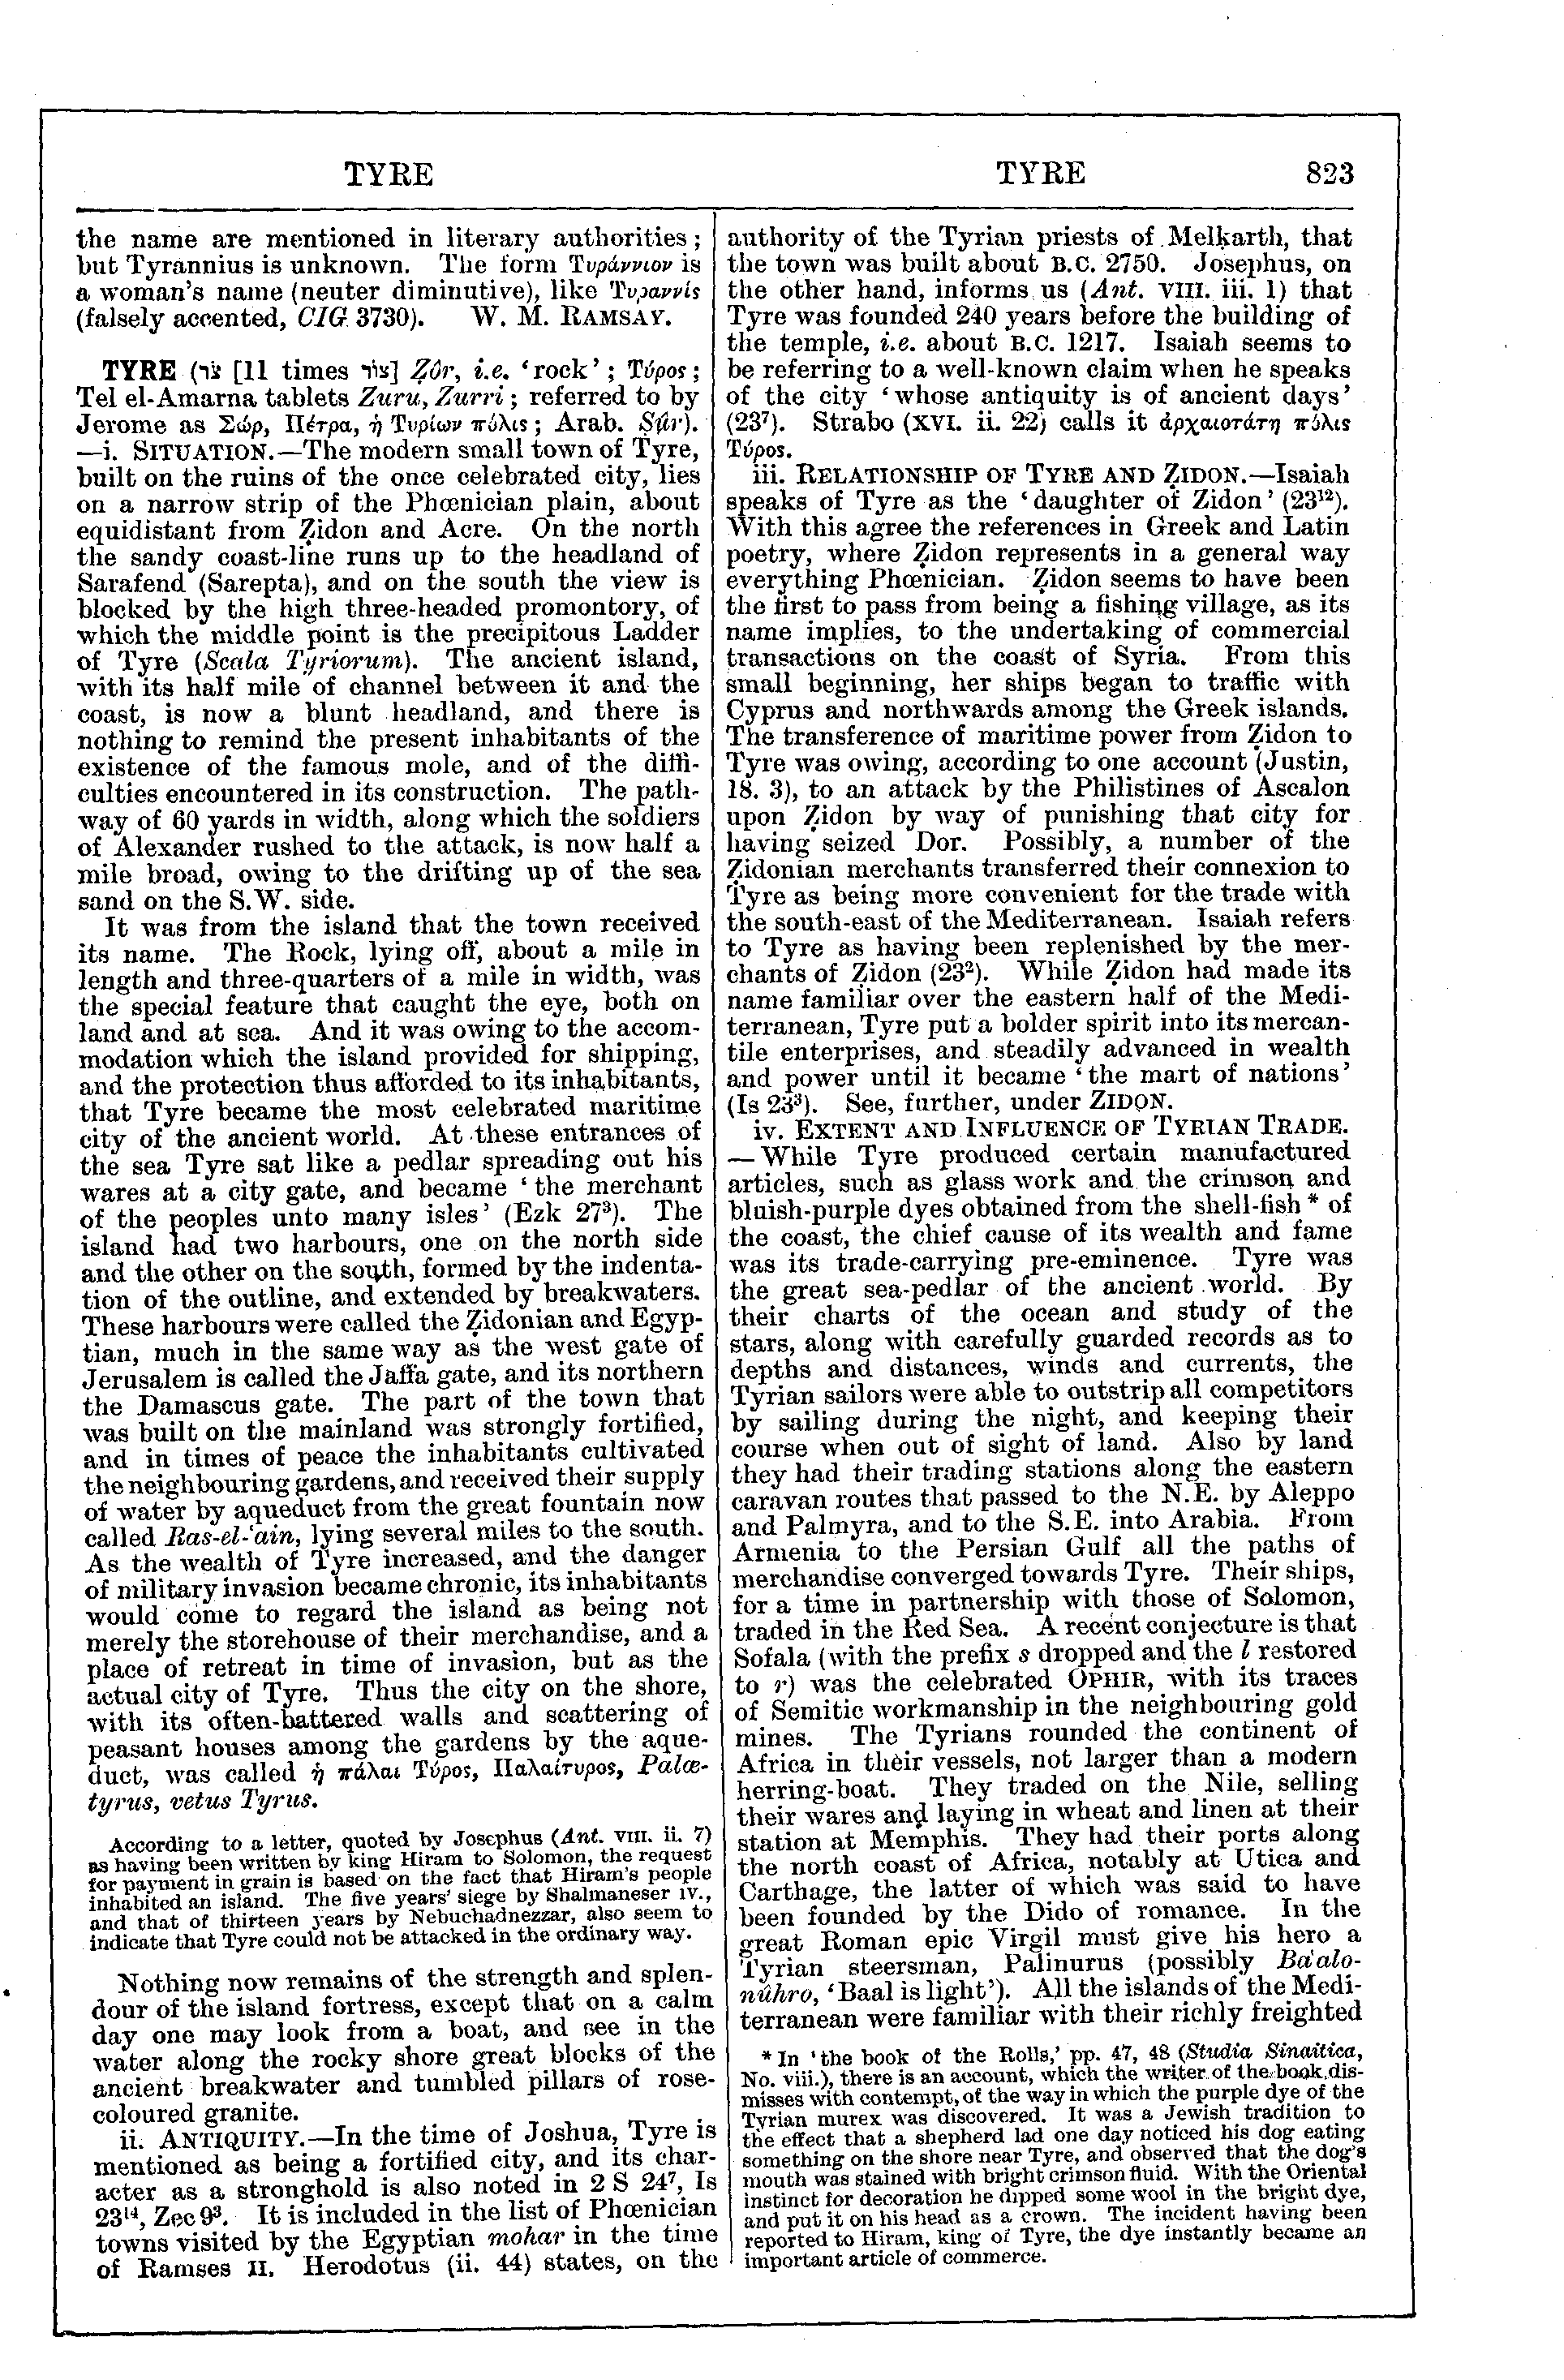 Image of page 823